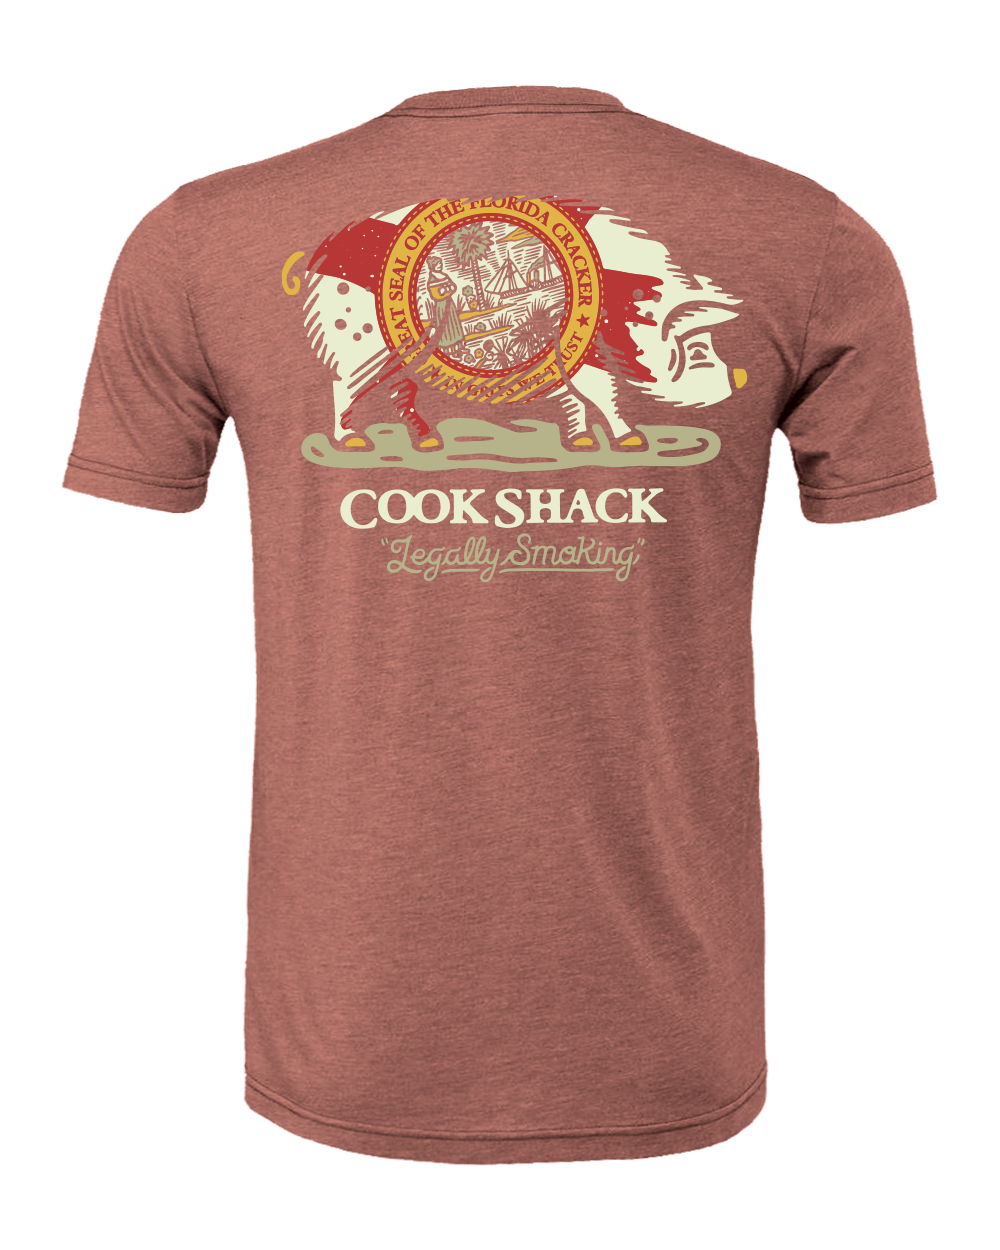 COOK SHACK STATE PIG SHIRT S/S - HEATHER CLAY